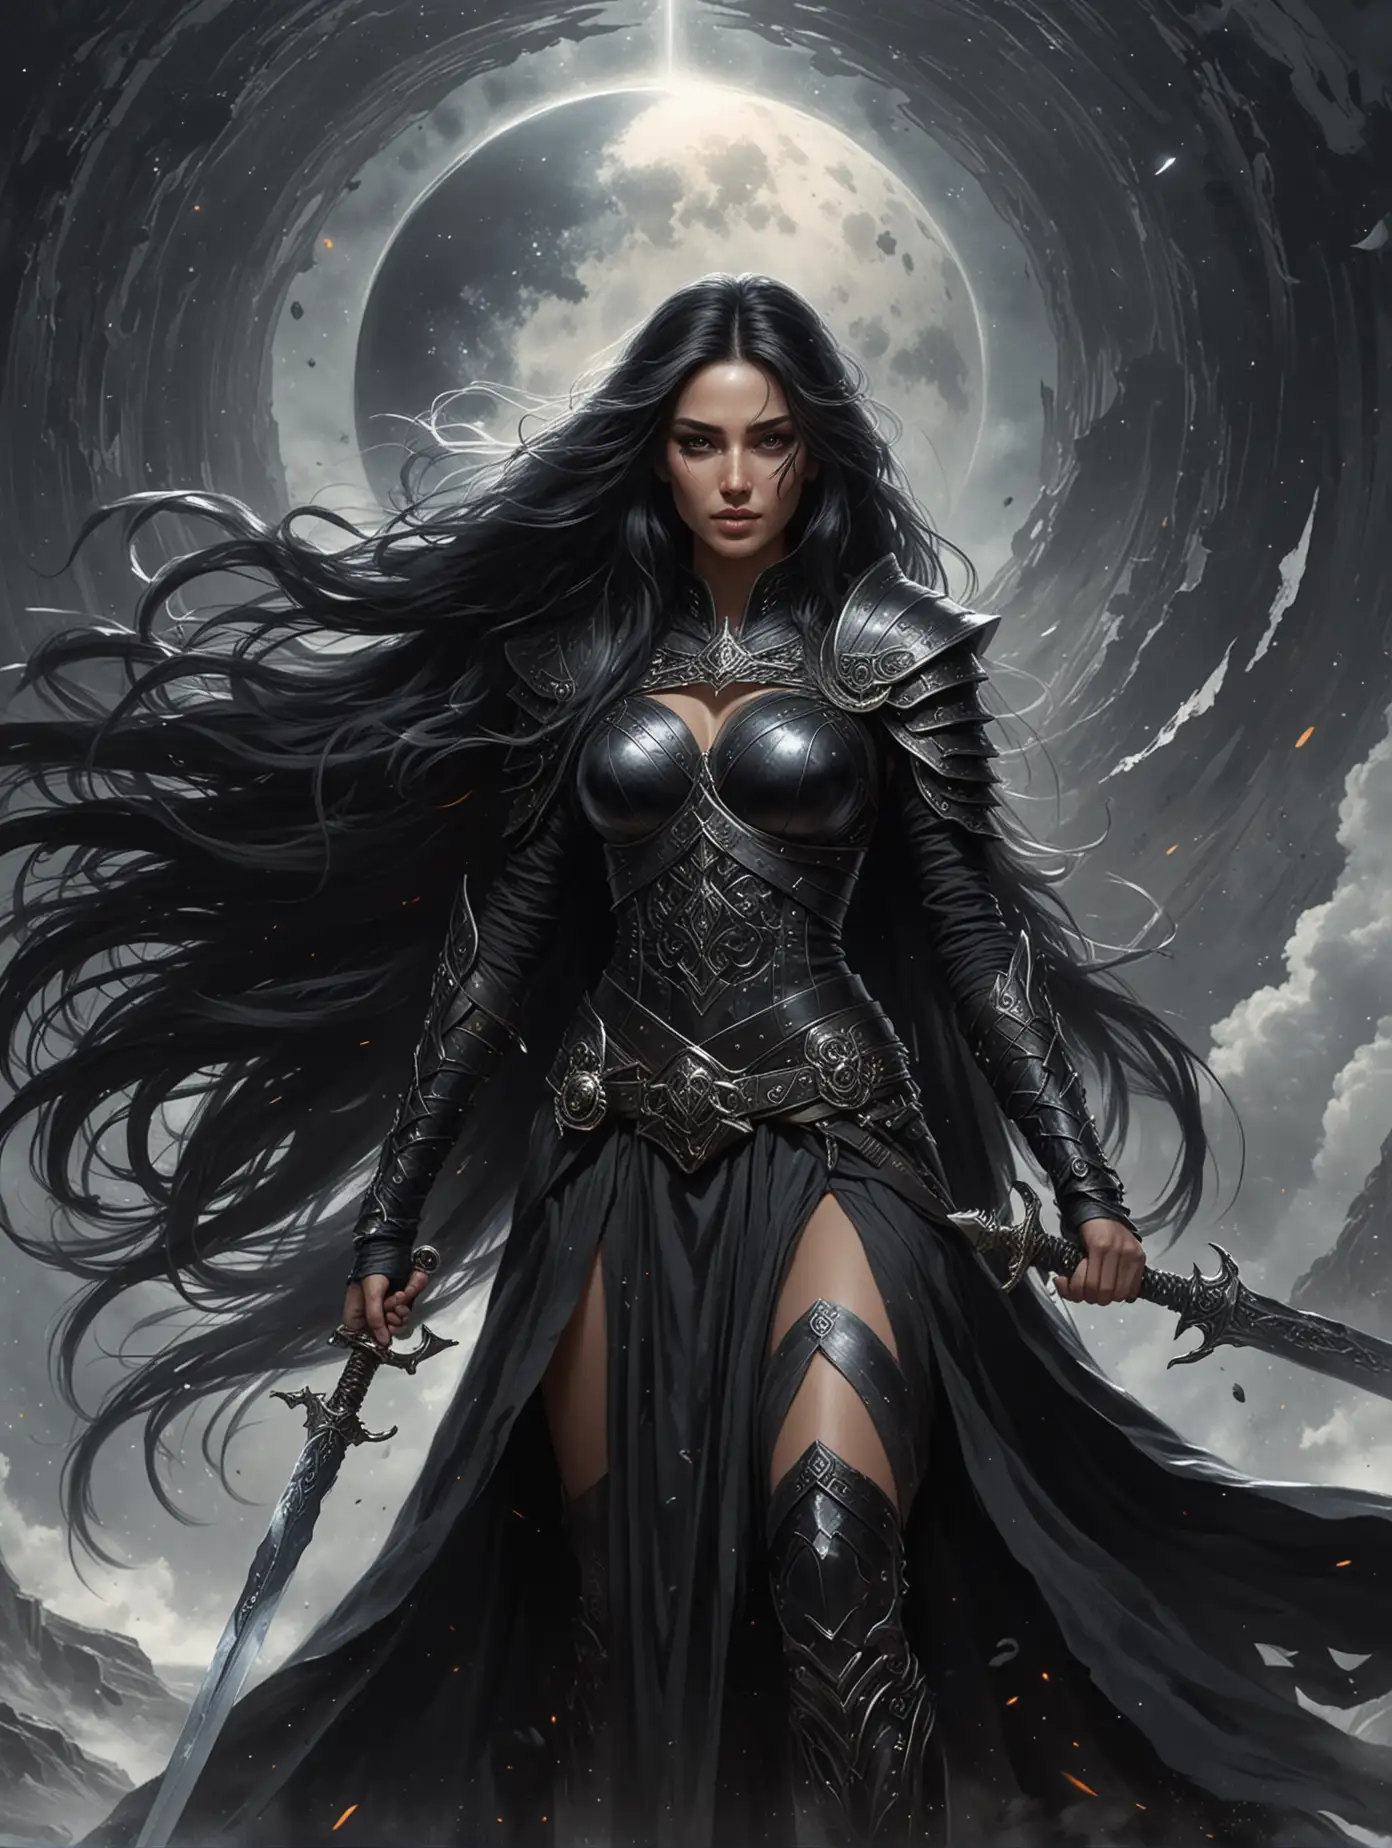 Mystical-Priestess-Warrior-with-Sword-Facing-the-Abyss